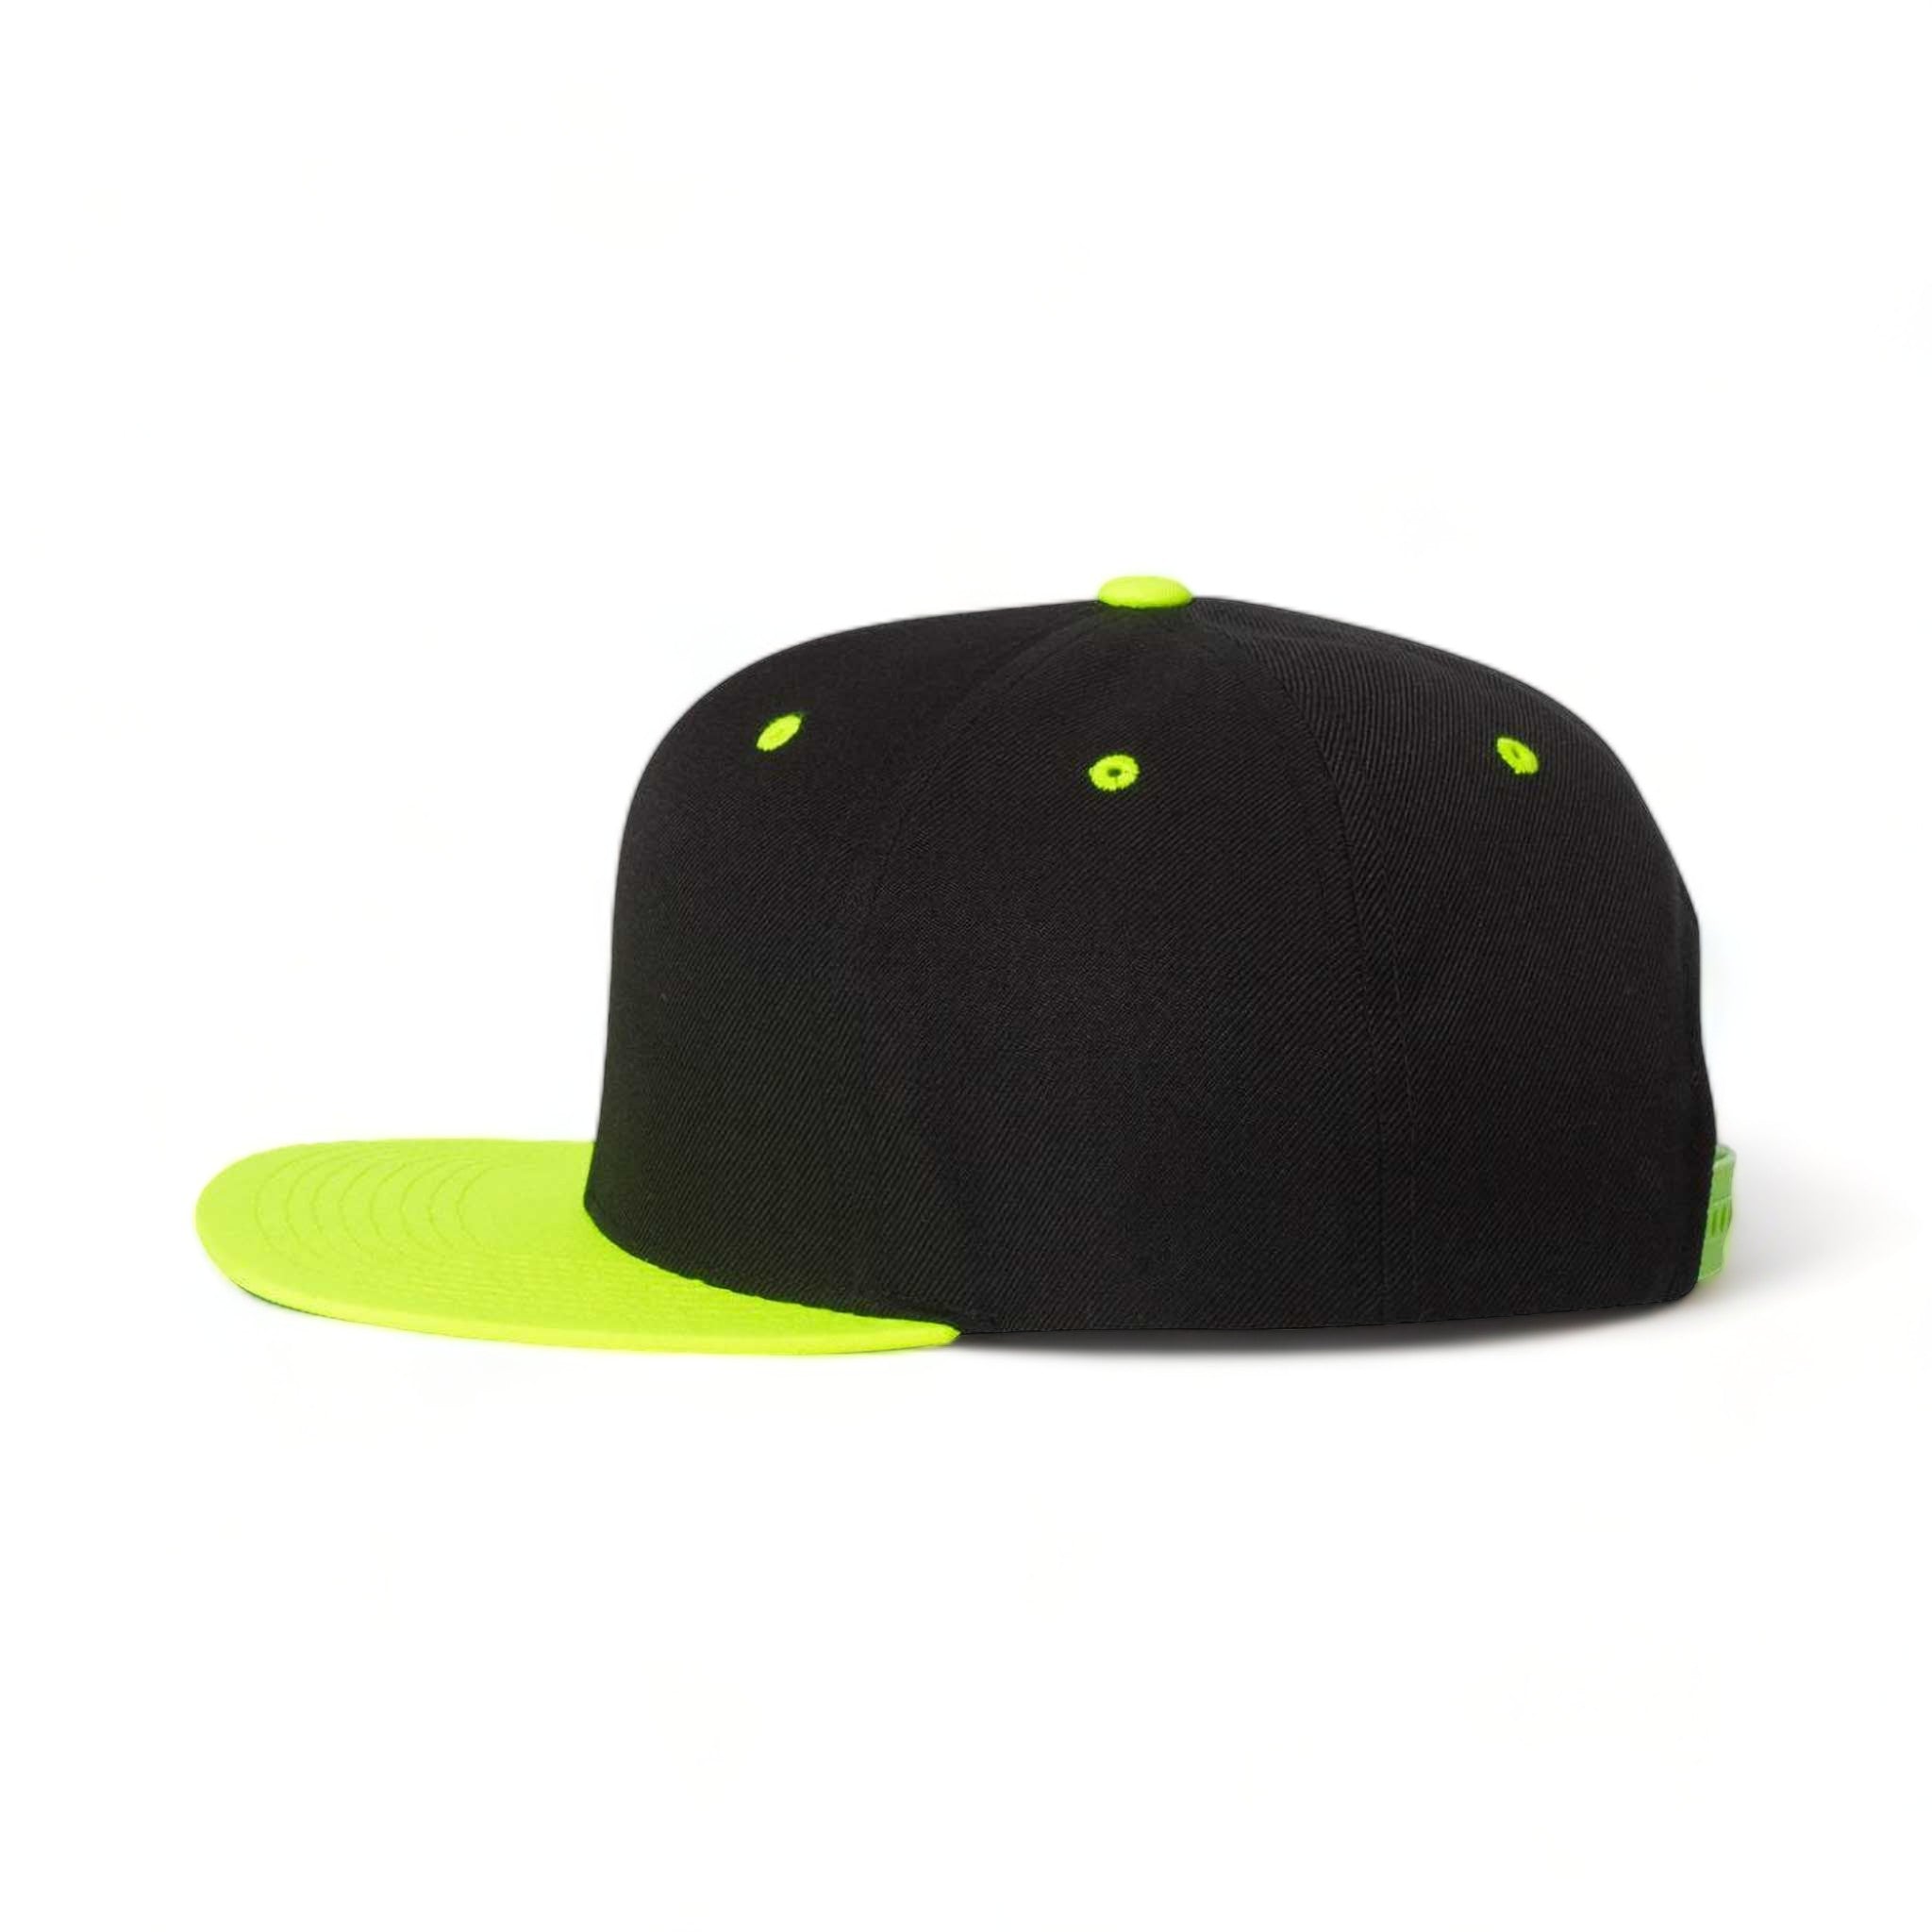 Side view of YP Classics 6089M custom hat in black and neon green